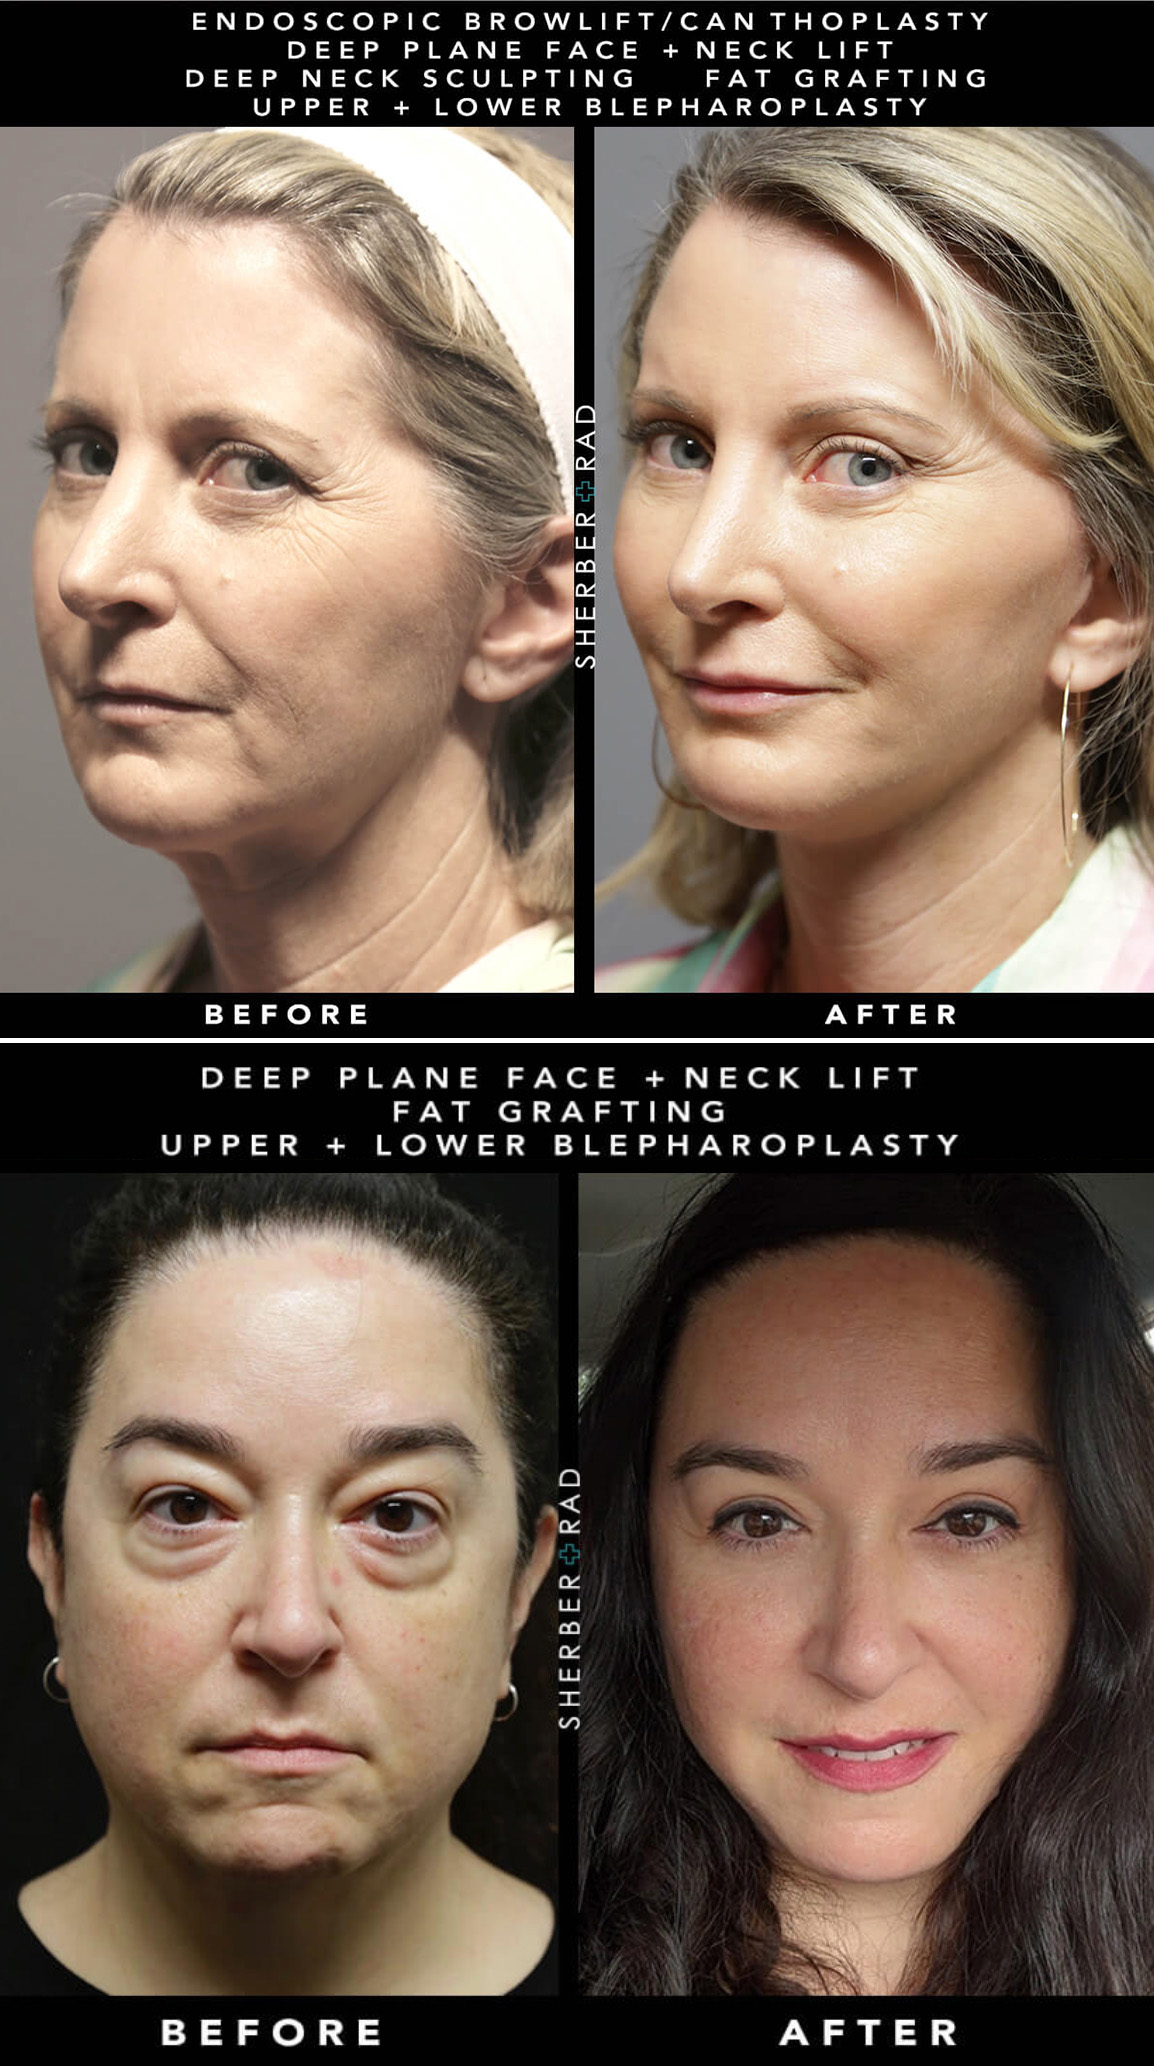 How to look younger: 60-year-old transforms jowls with filler